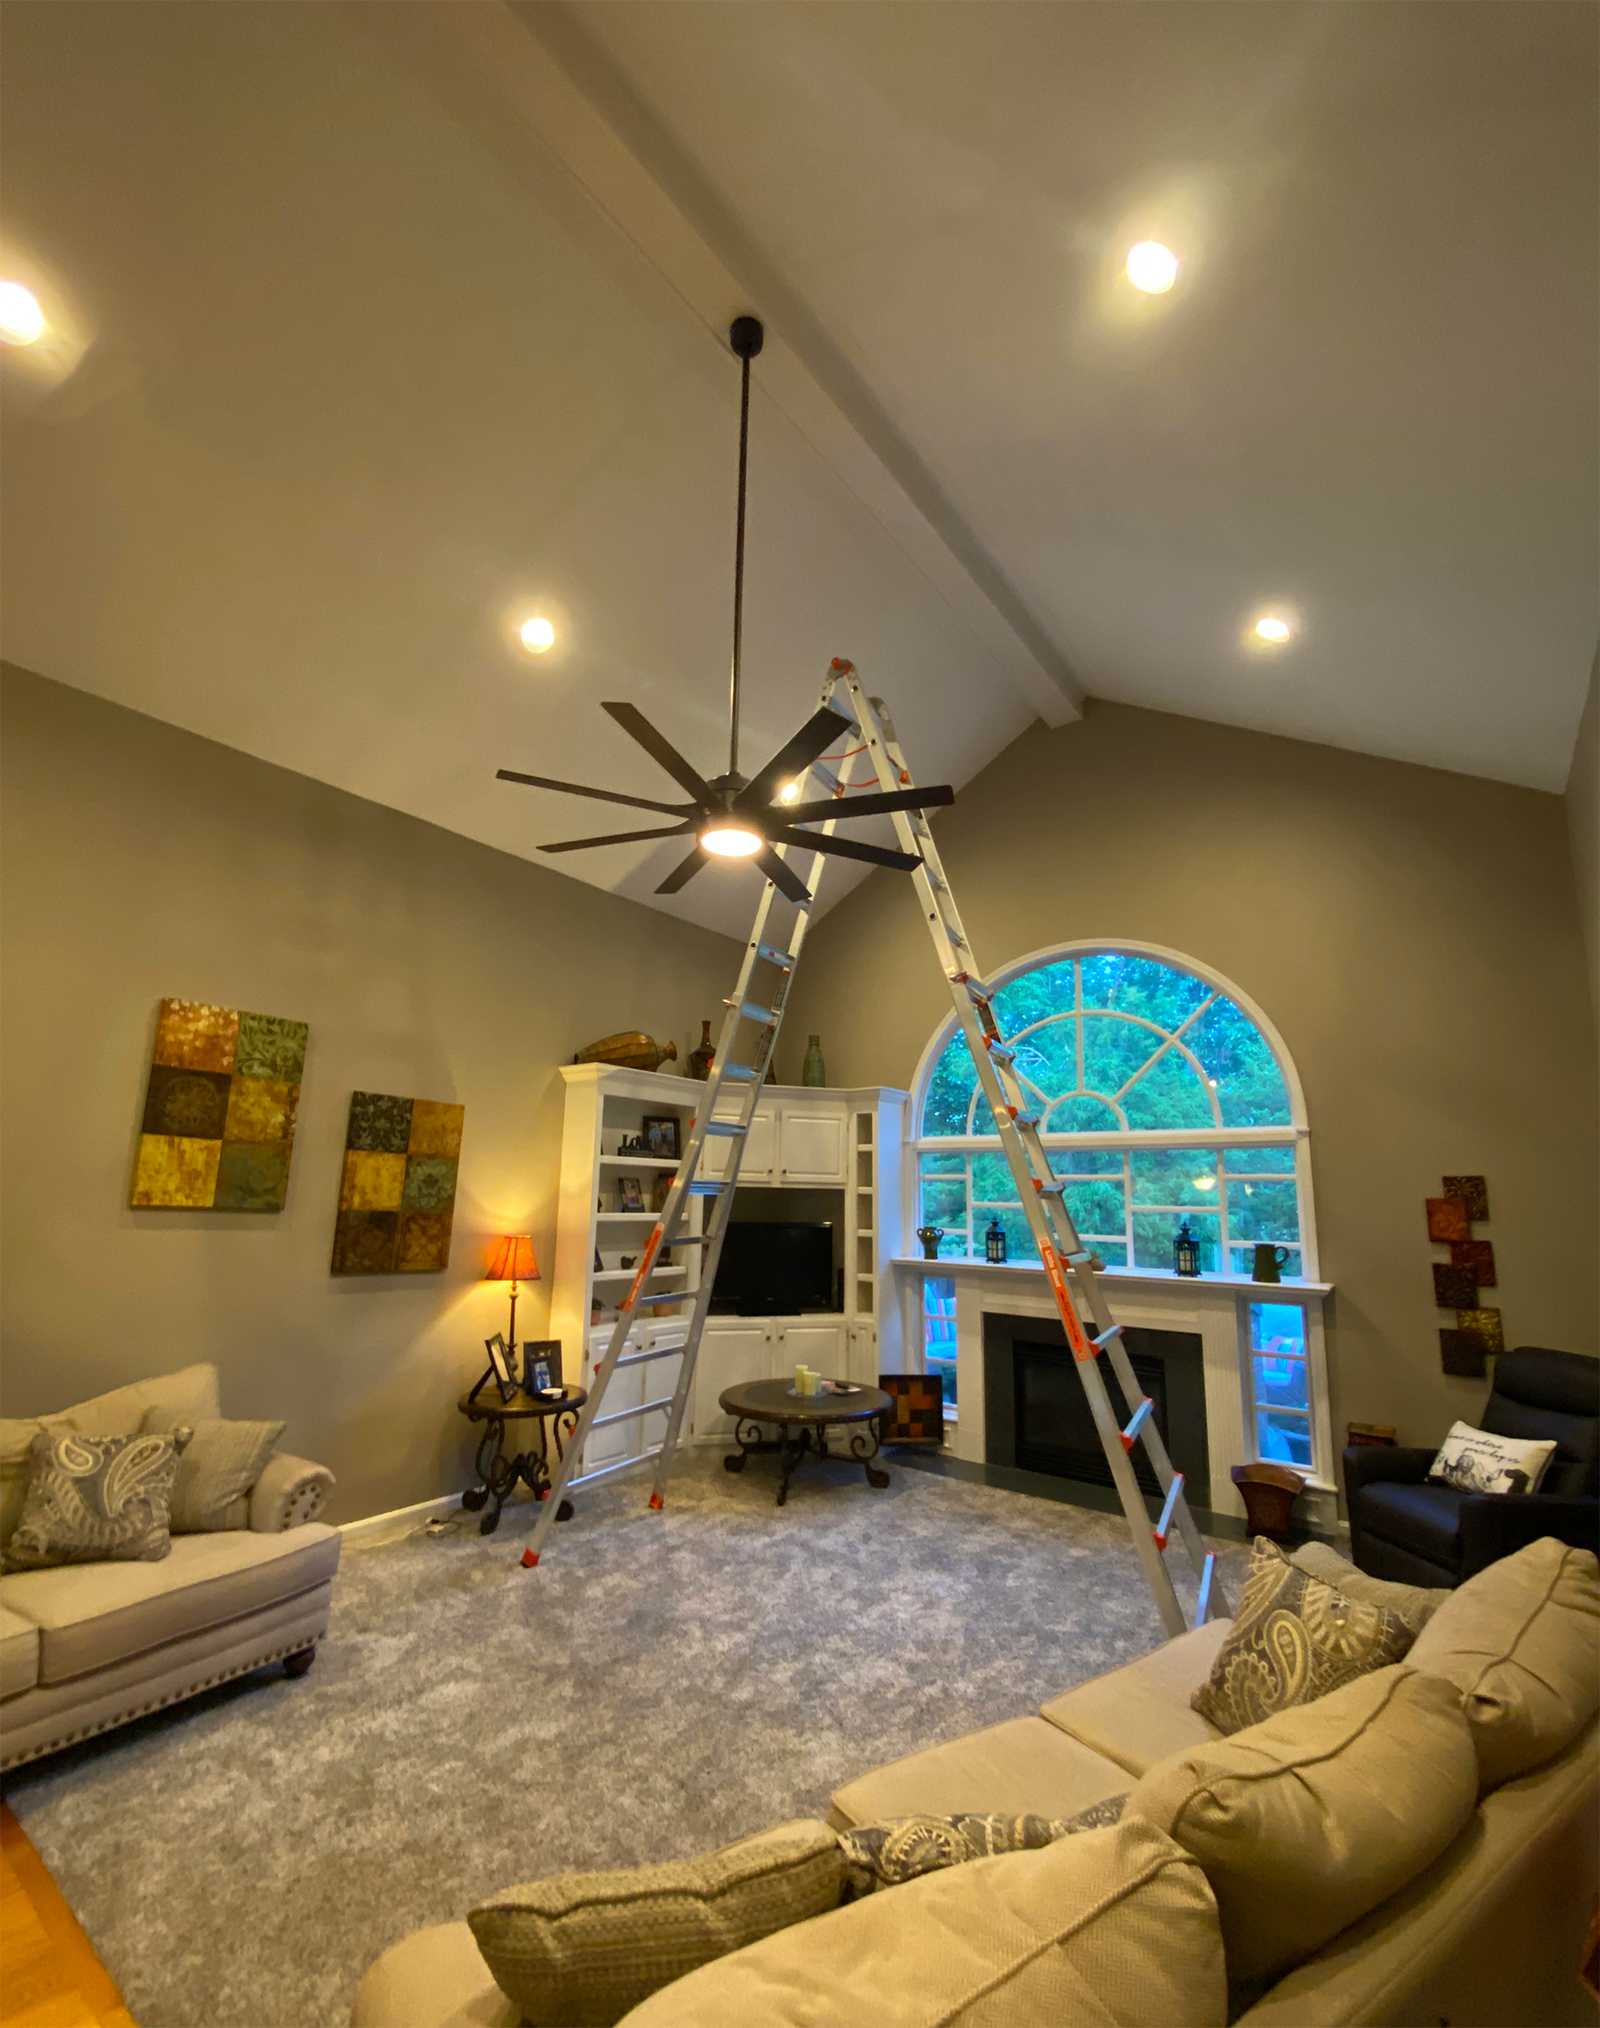 VAULTED CEILING FAN REPLACEMENT